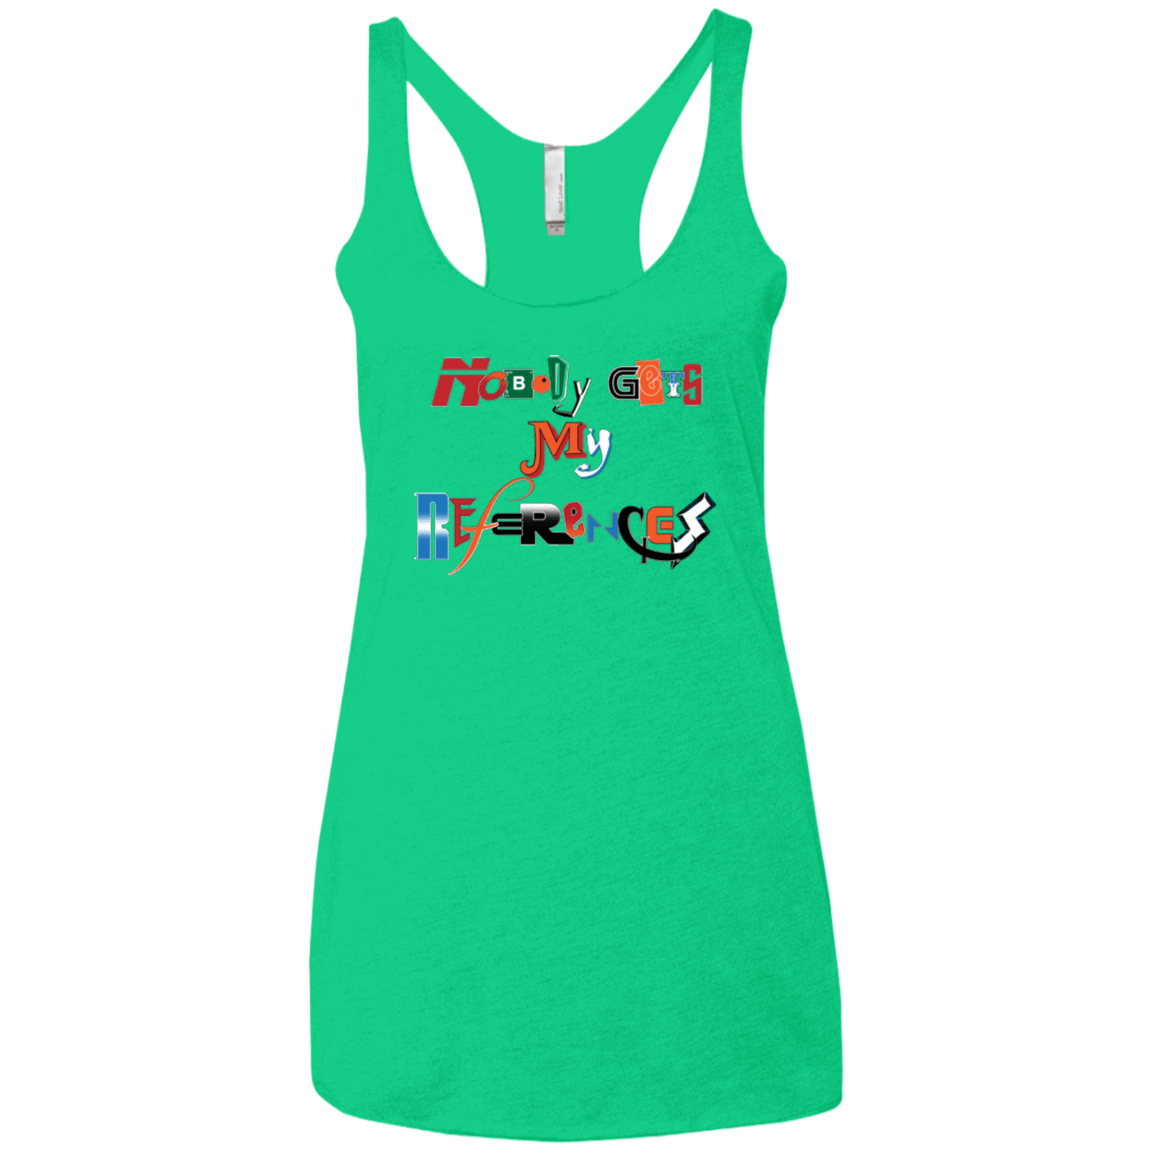 T-Shirts Envy / X-Small The Enigma of a Fan Women's Triblend Racerback Tank